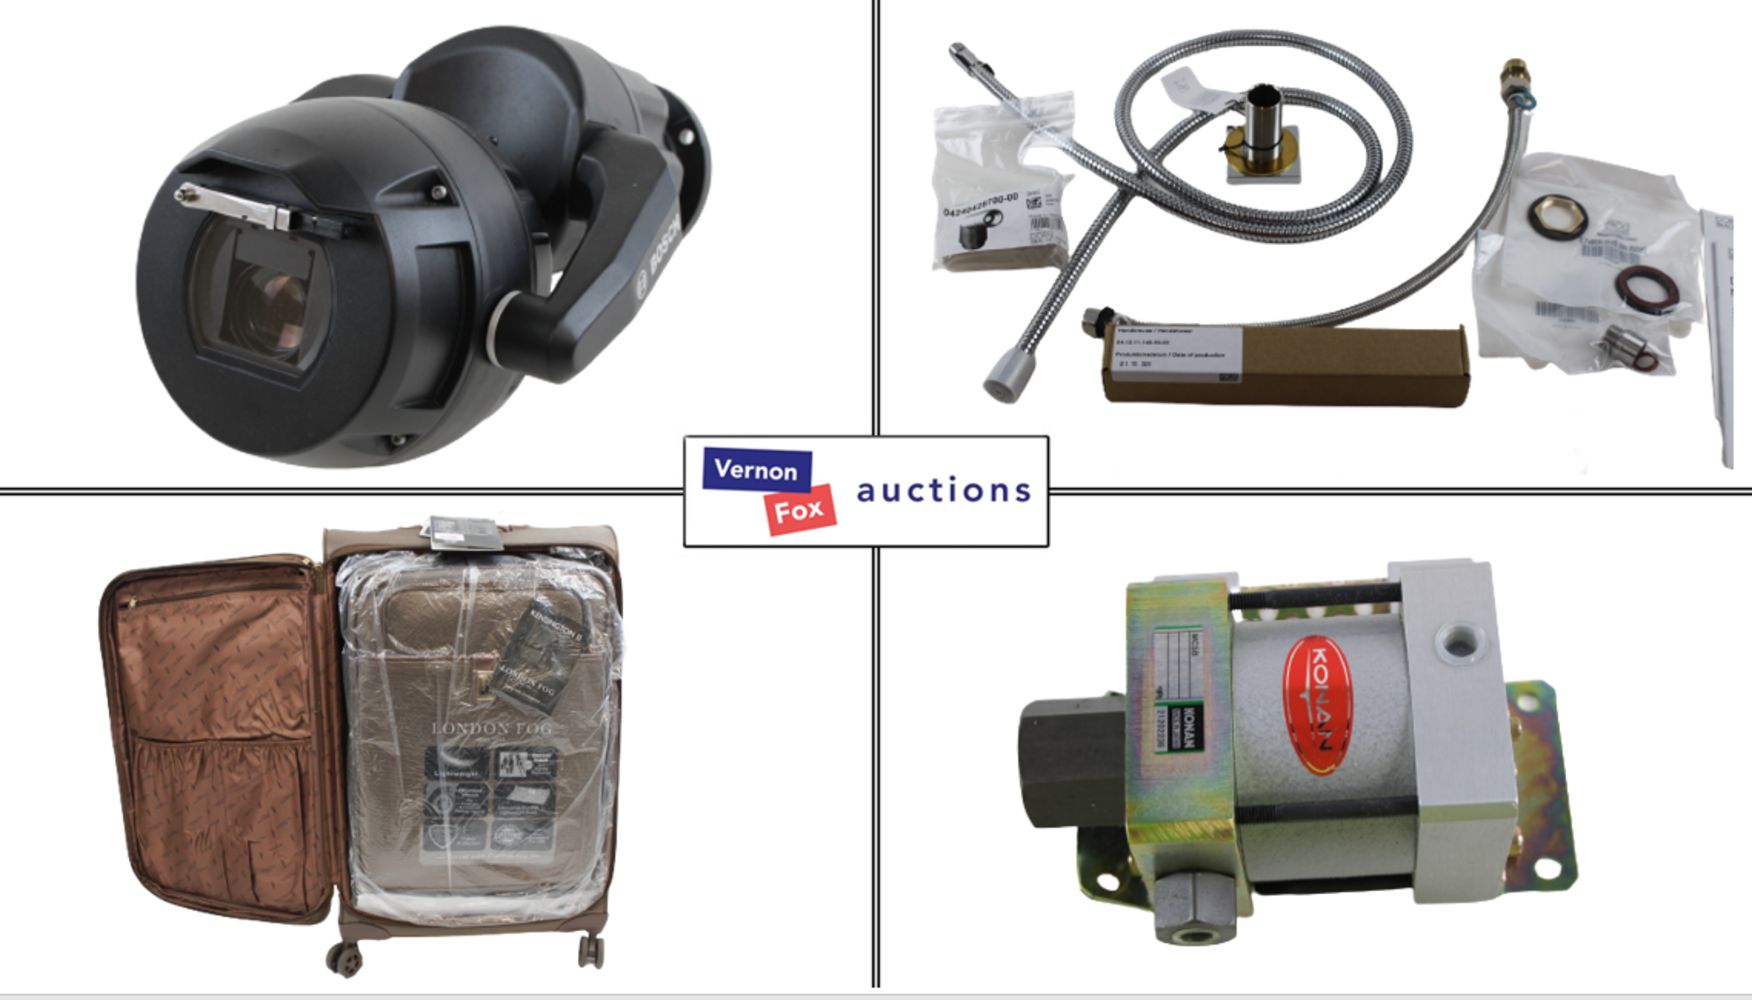 TIMED ONLINE AUCTION: A wide choice of IT Accessories, Homewares, Auto and Industrial Items. FREE UK DELIVERY!